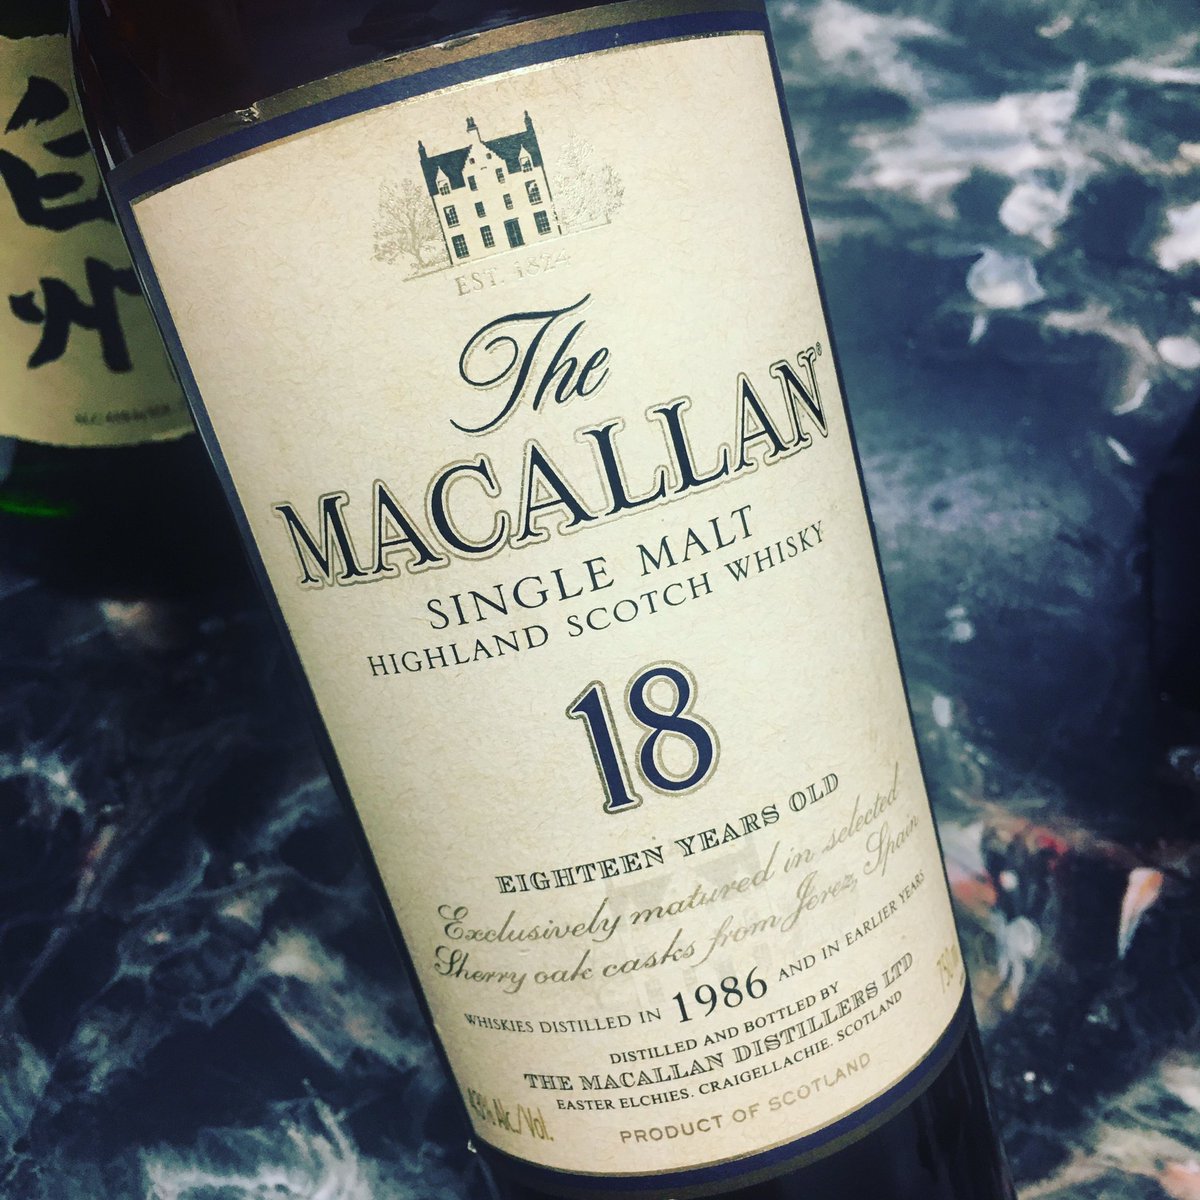 Thank you for selling us 1986 #macallan 18 Year Old #sherryoak #scotch #Whisky today!

Contact us when you're ready to sell your #whisky! sales@tkwine.com

#sellwhiskey #tkwine #torrance #losangeles